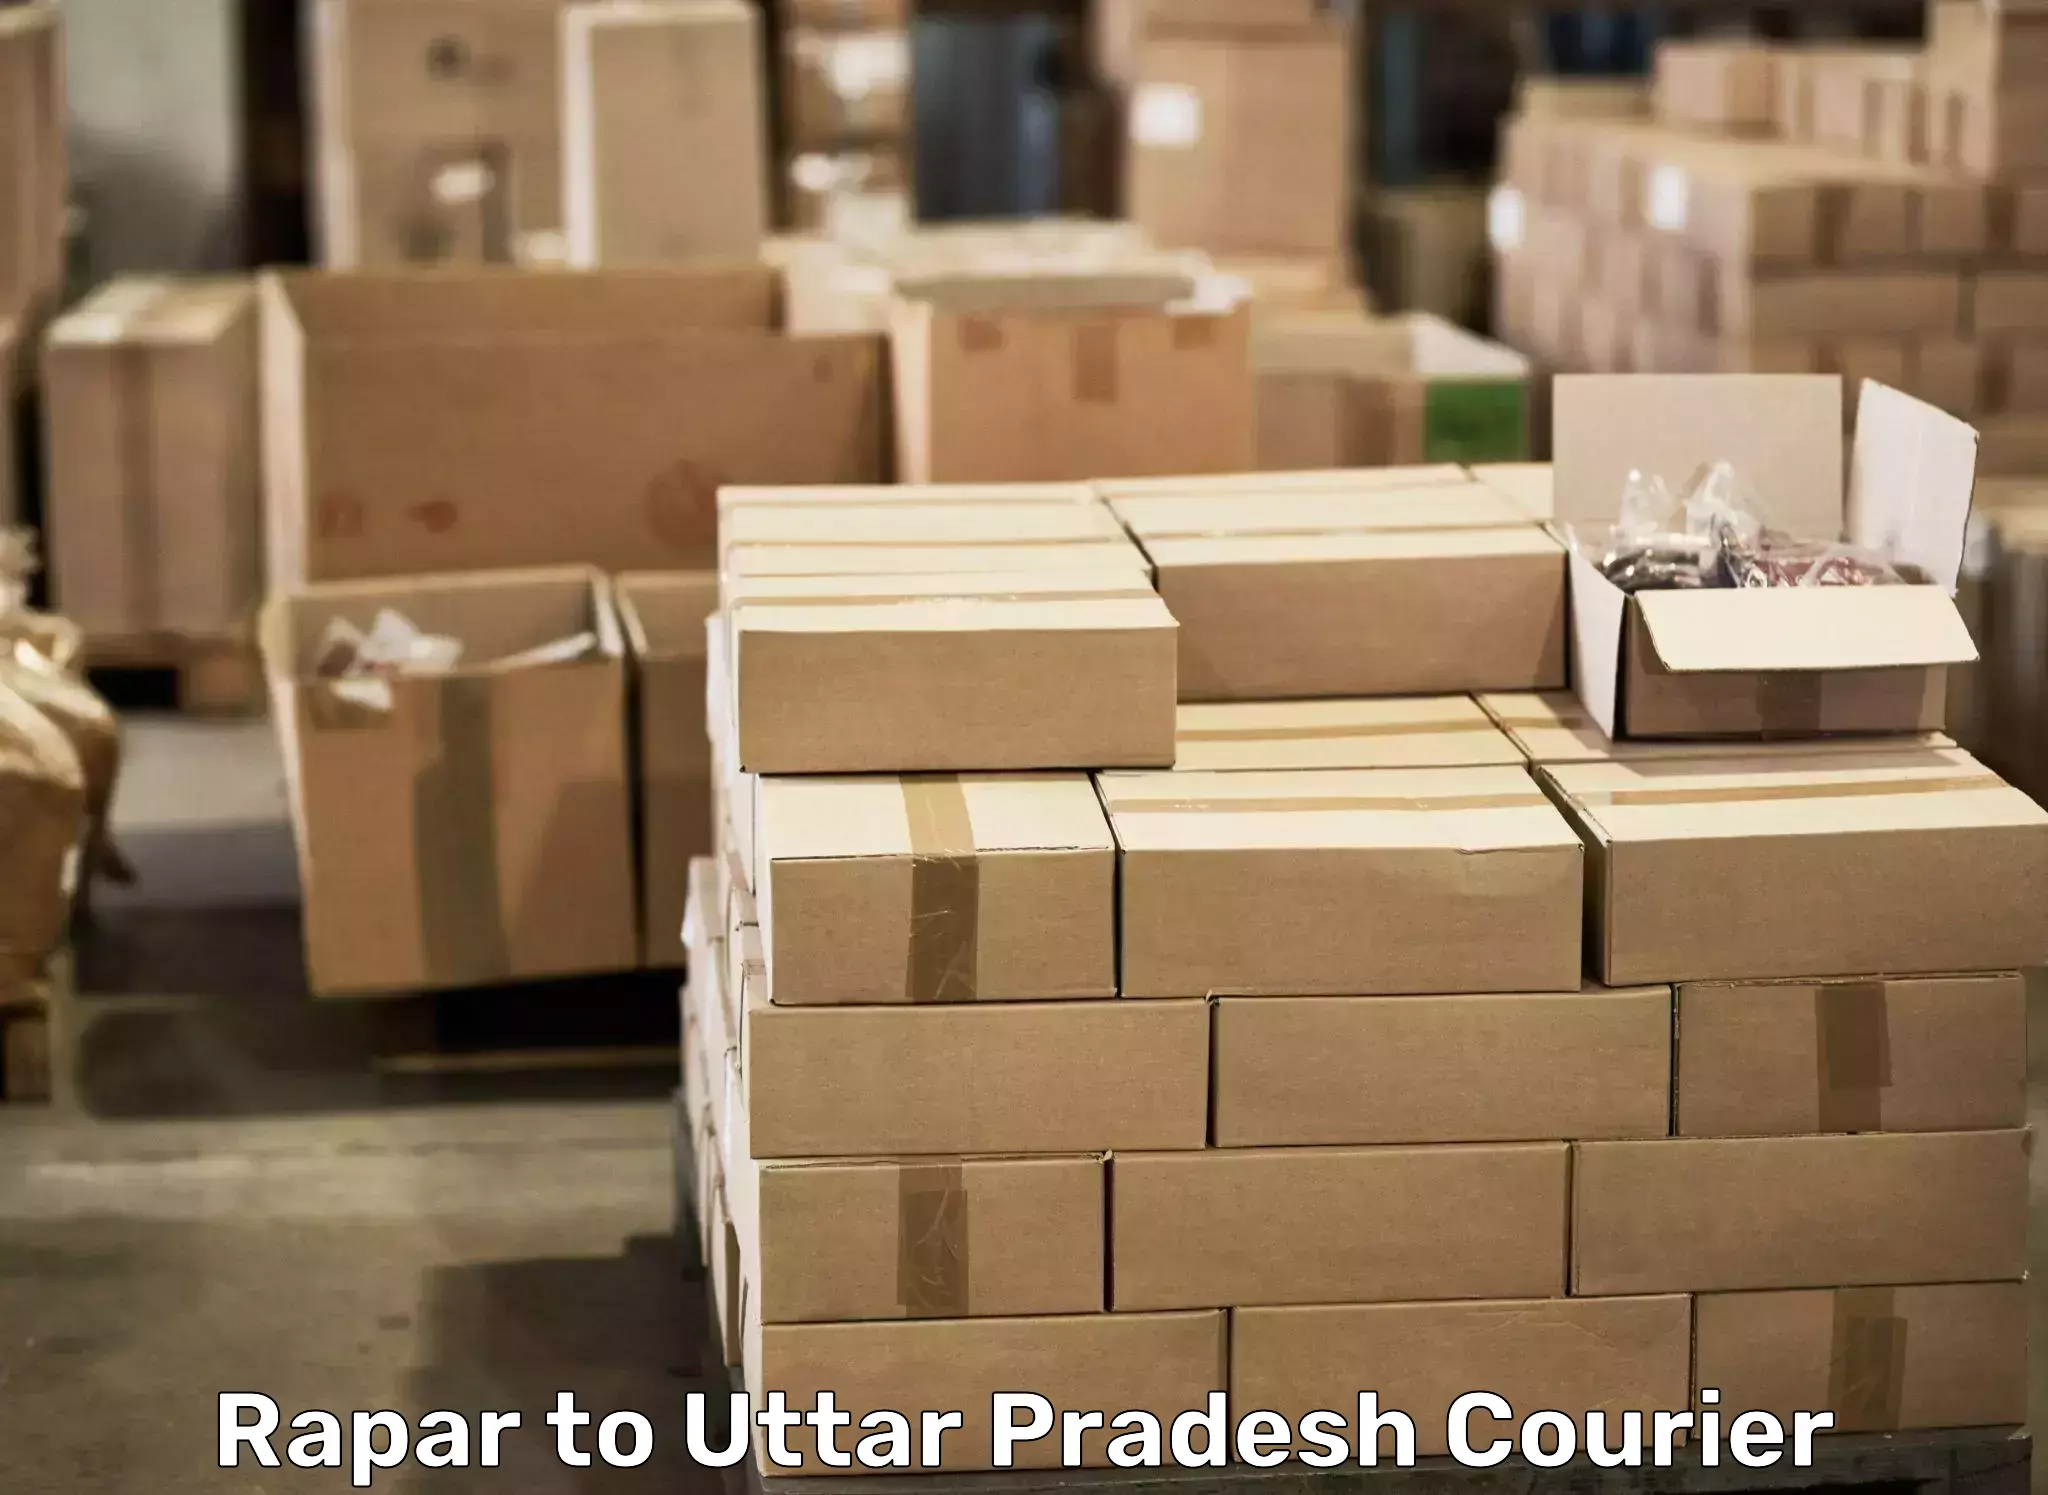 Trusted furniture movers Rapar to Sitapur